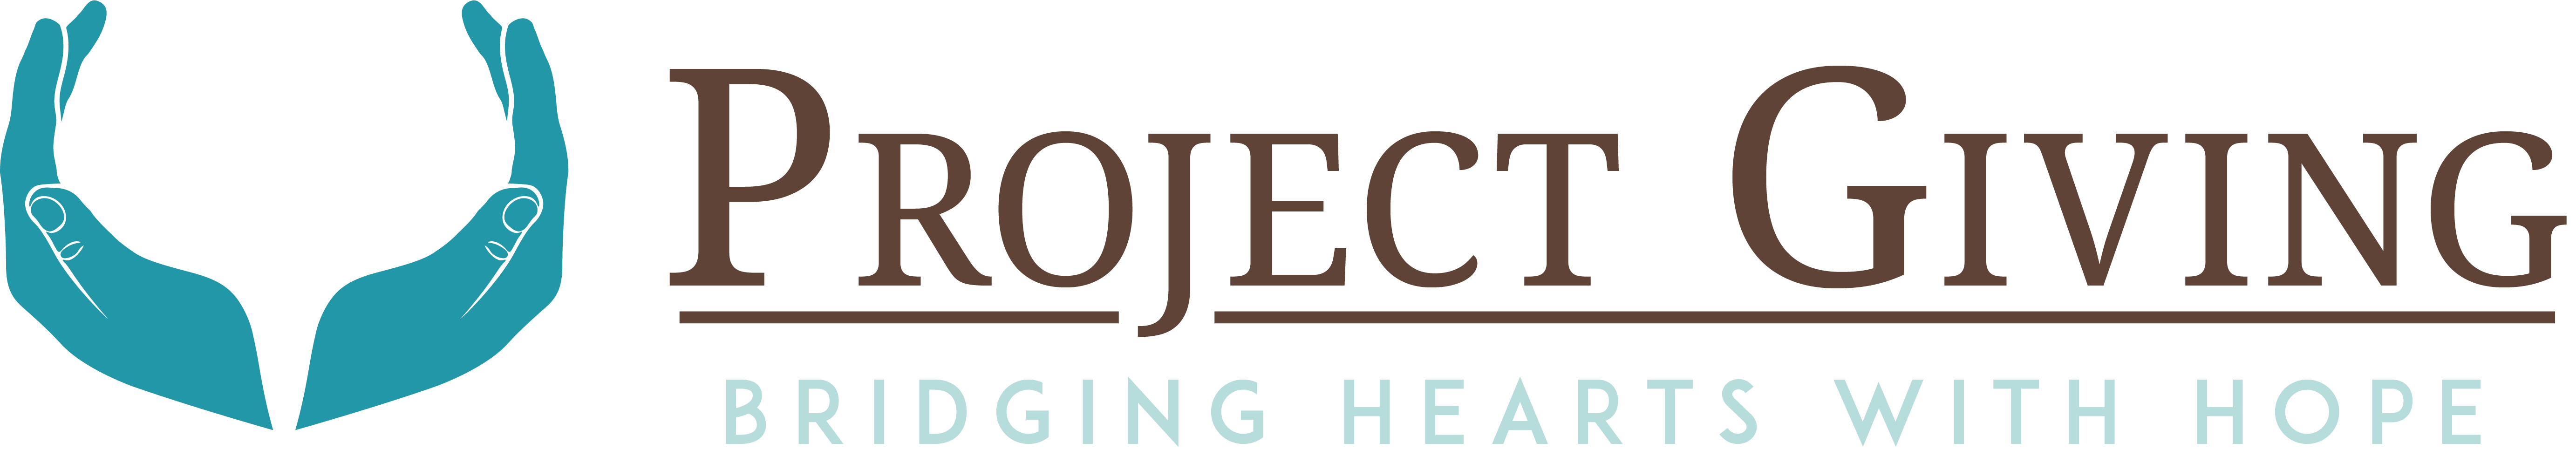 Project Giving